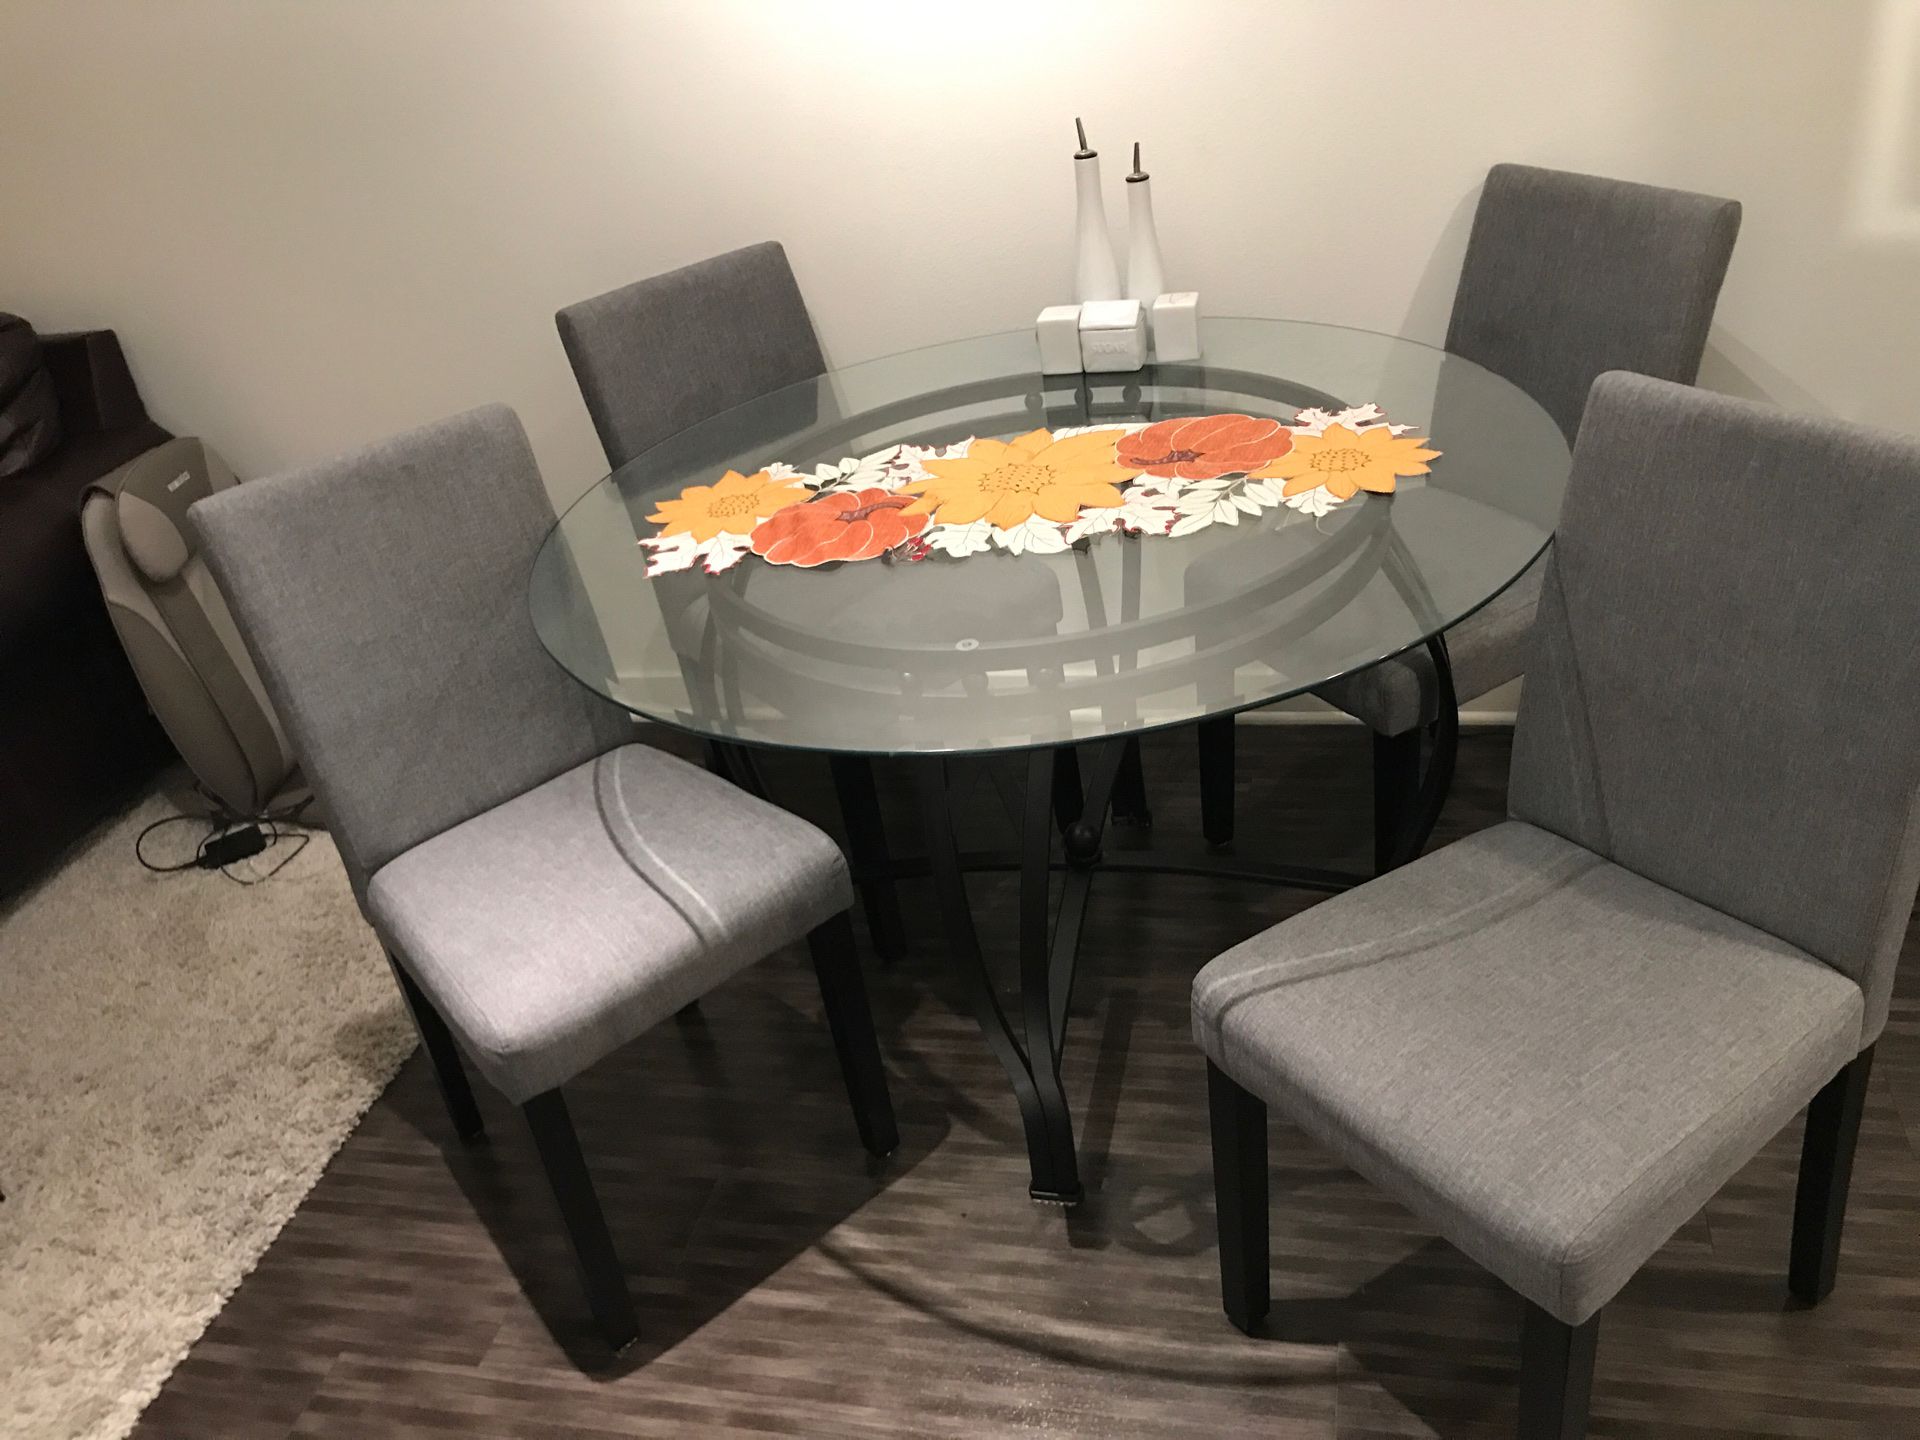 4 Seat, glass, kitchen table